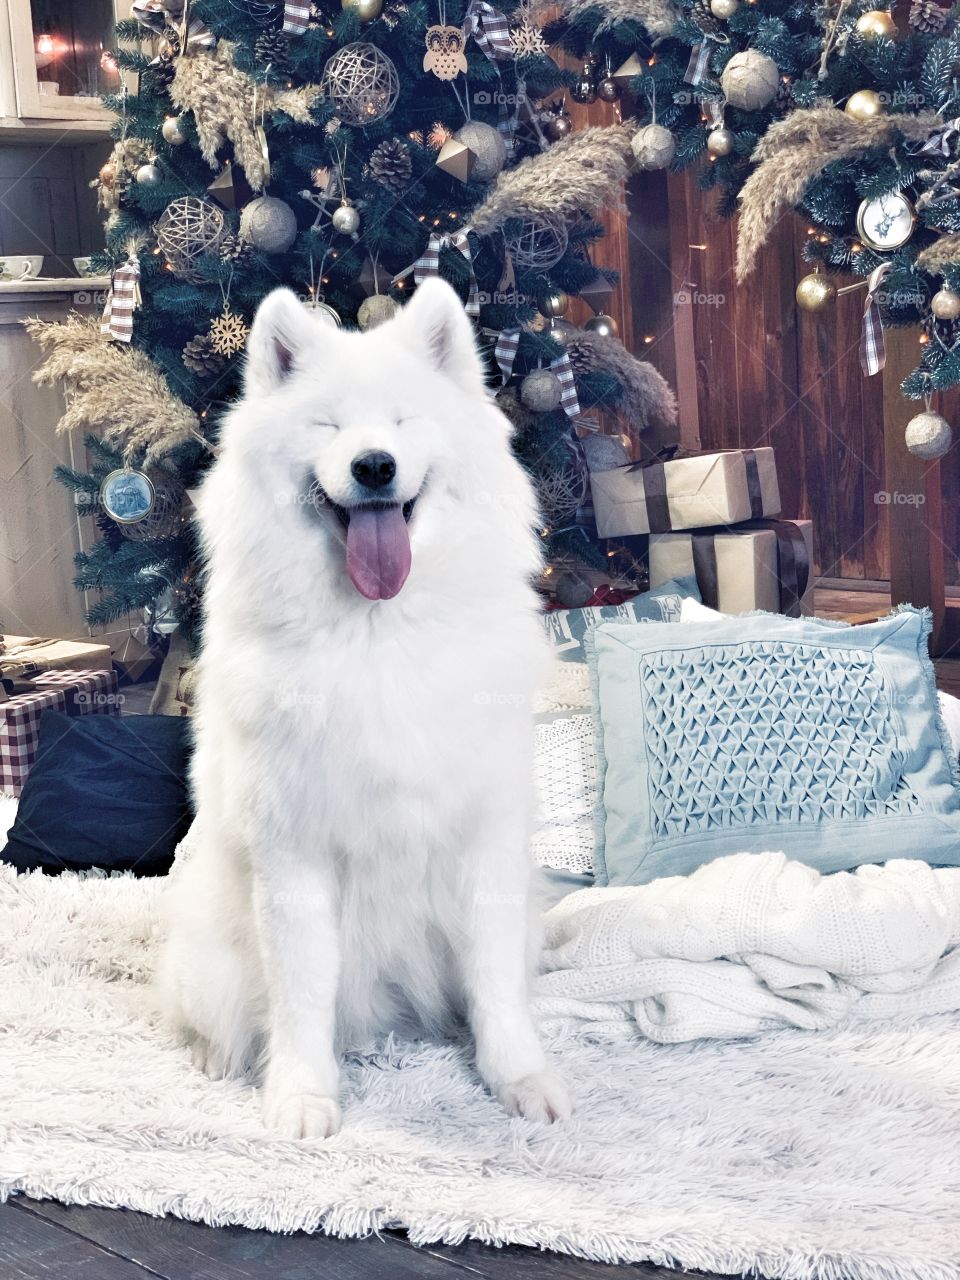 Samoyed is the most winter and Christmas breed. Always smiling and remind you about happy holidays. White and warm, and always cute